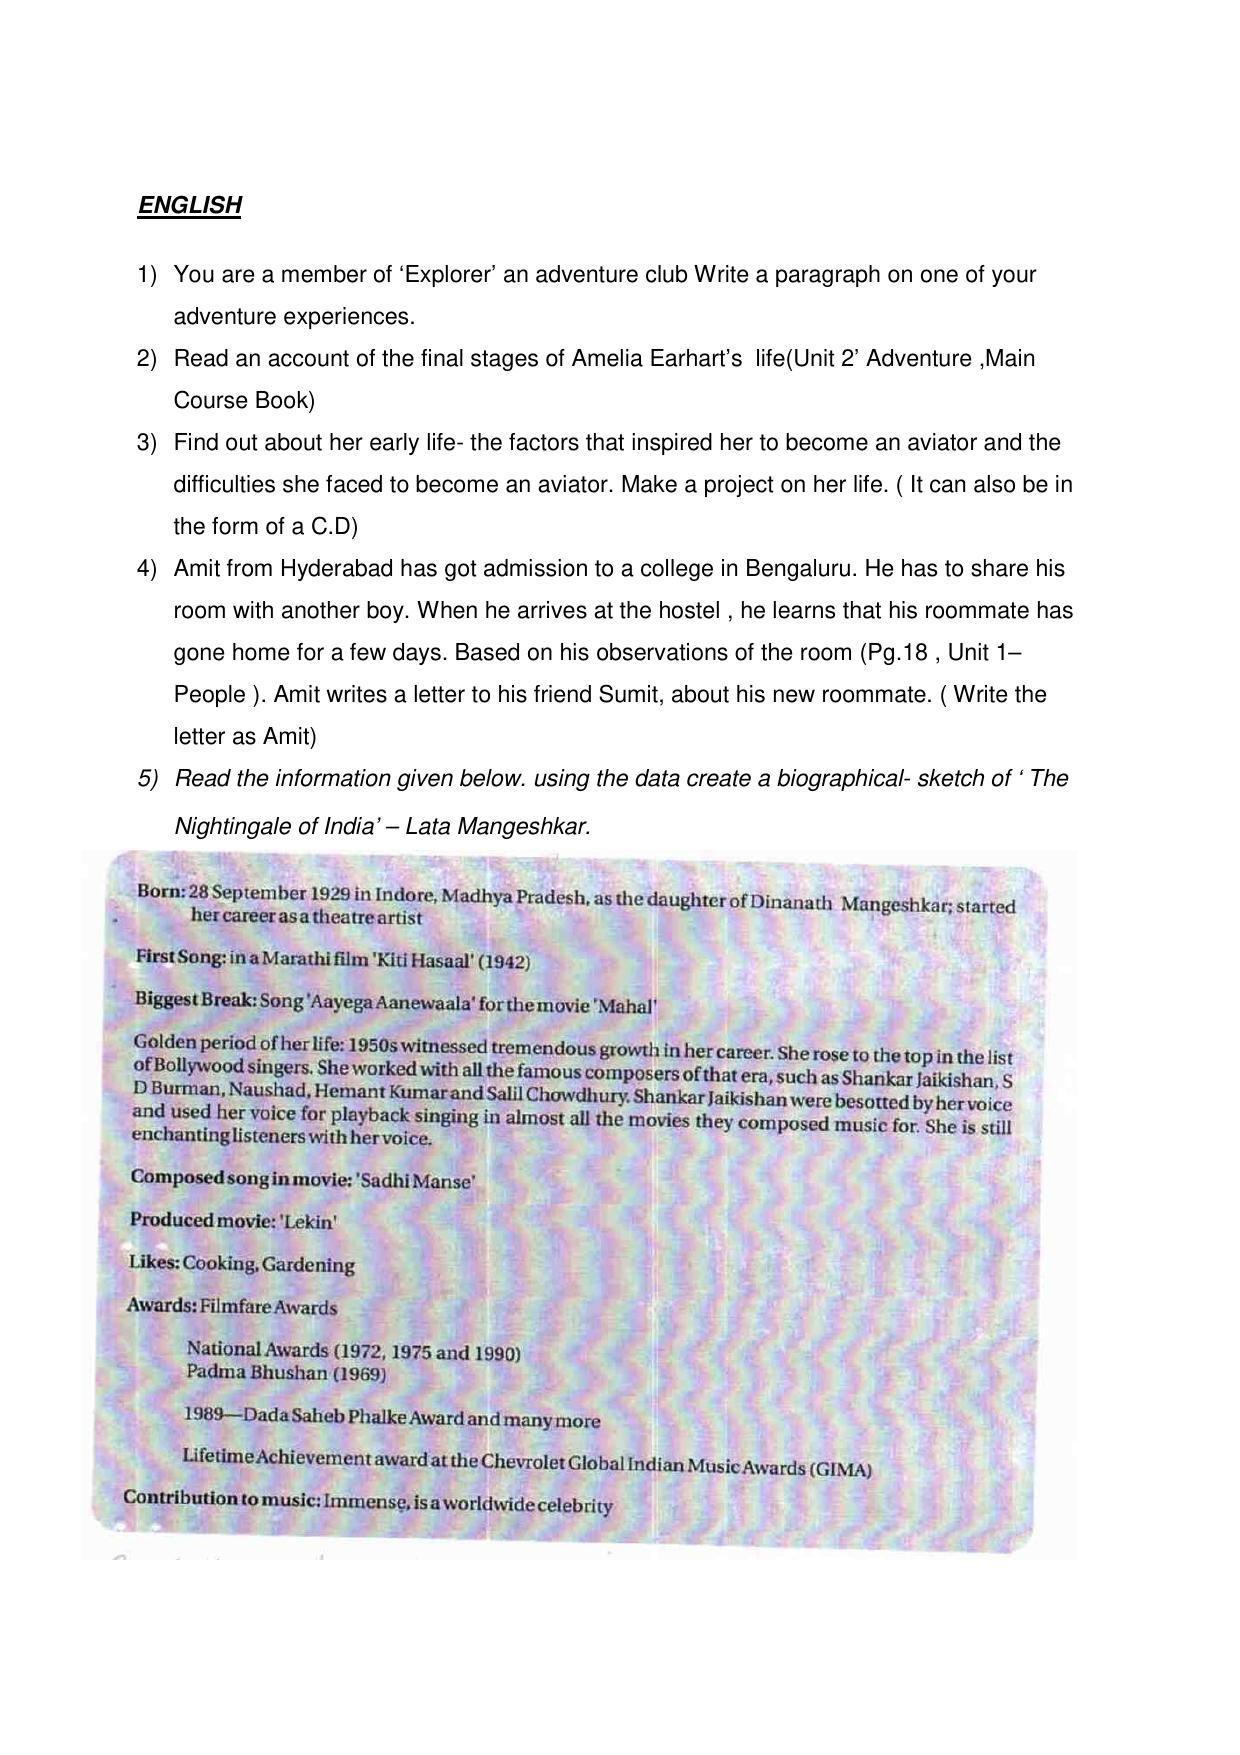 CBSE Worksheets for Class 9 Assignment 6 - Page 2